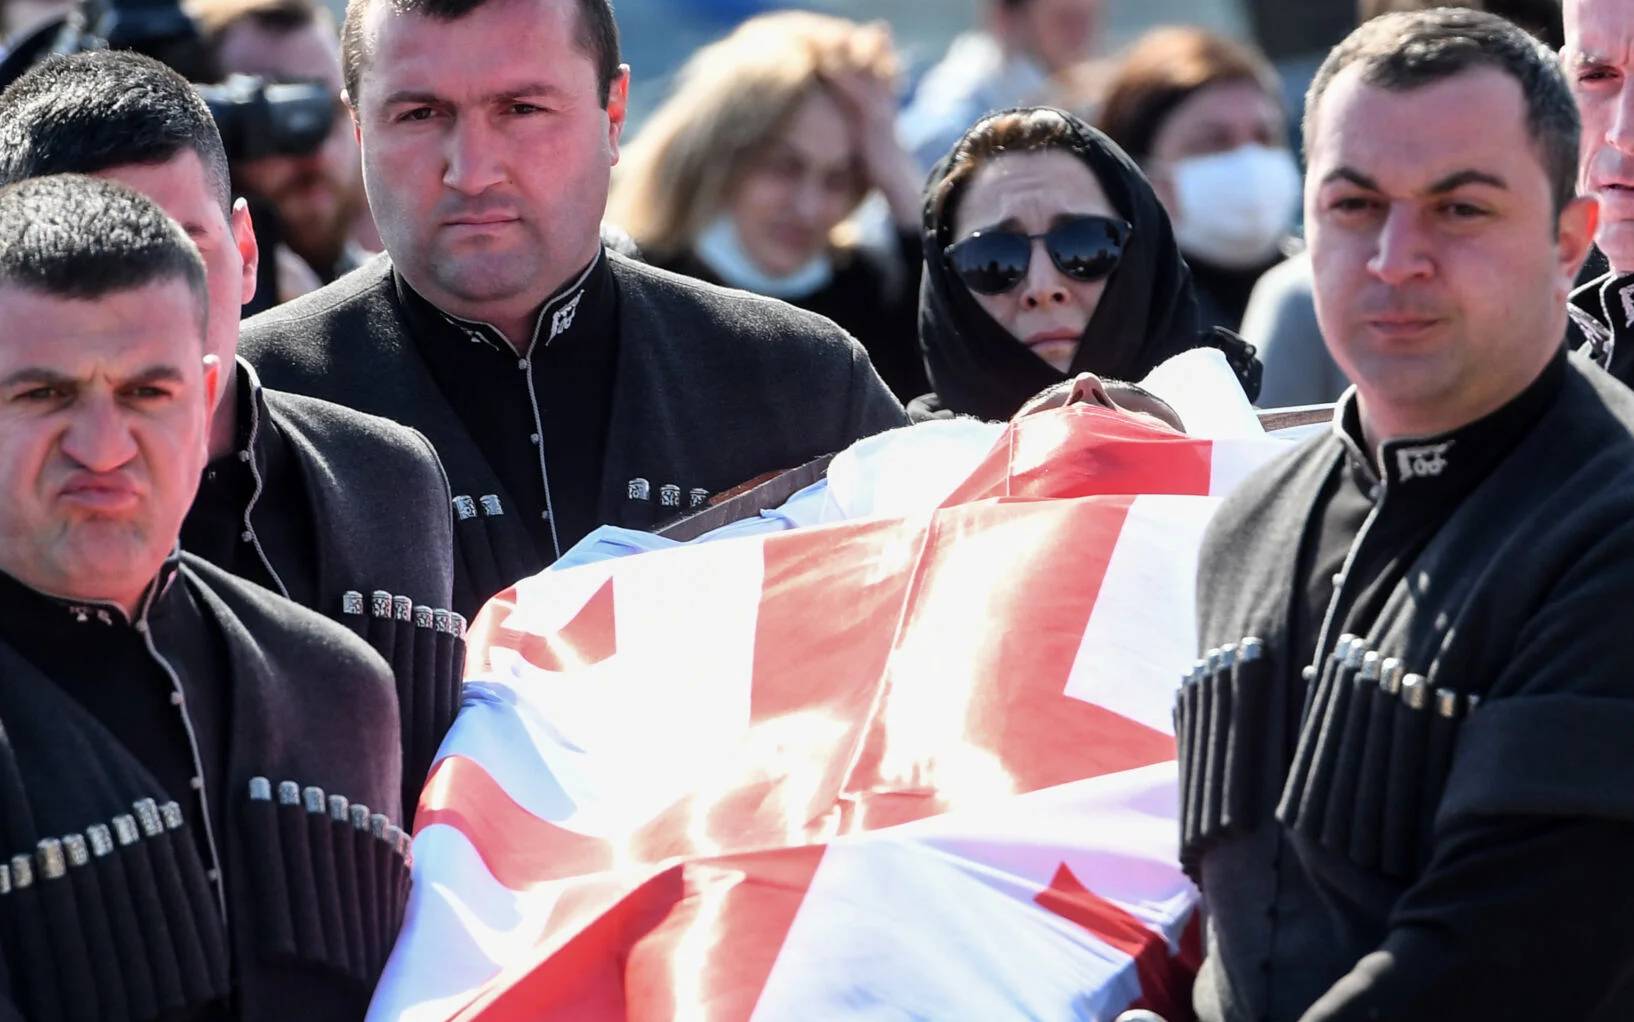 People attend a funeral of David Ratiani, a Georgian volunteer fighter killed during the ongoing Russian military action in Ukraine, in Tbilisi on March 26, 2022. (Photo by Vano SHLAMOV / AFP)